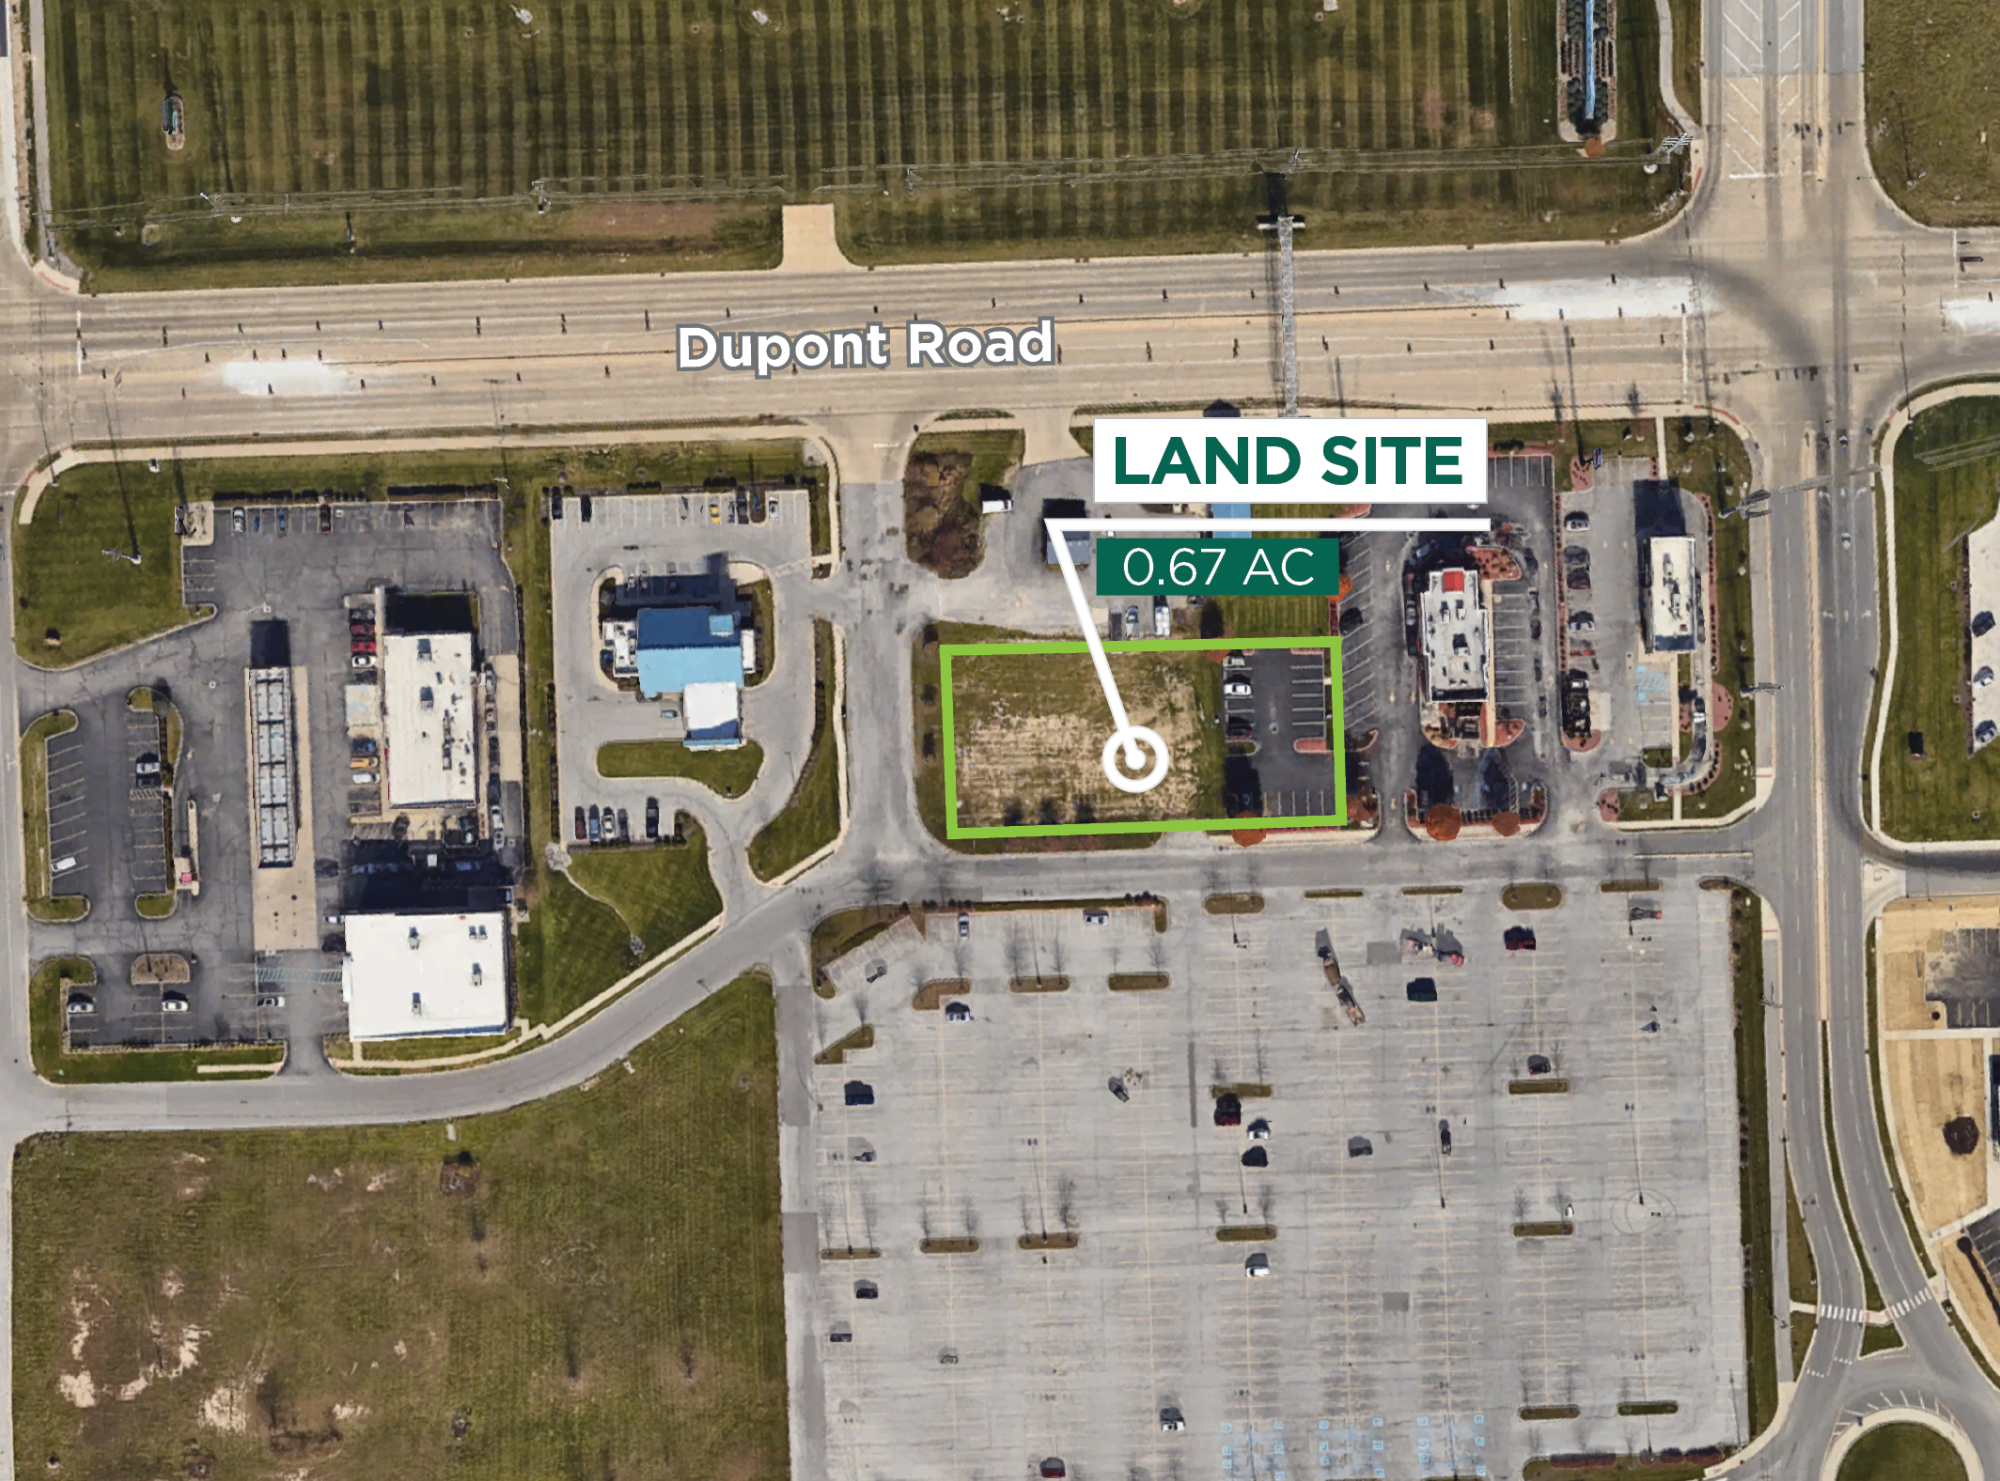 Sturges Property Group - Land For Sale on Dupont Road in Fort Wayne, IN 